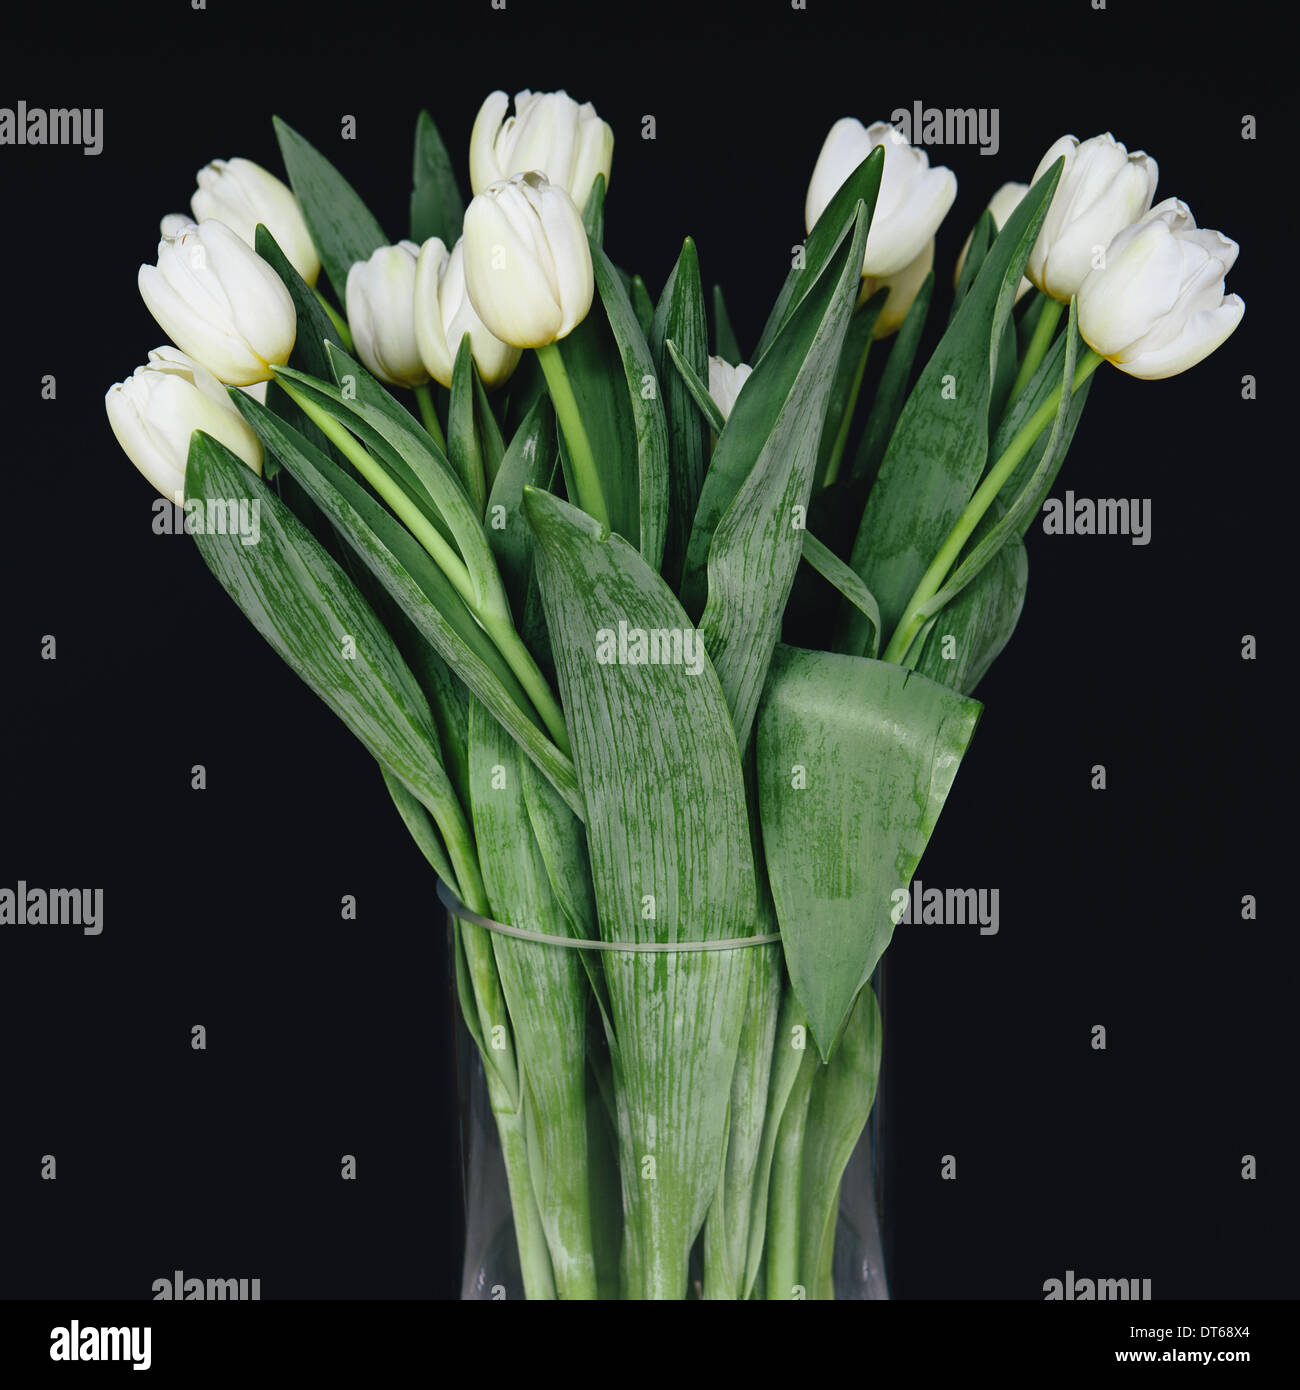 White tulips in a vase, against a black background Stock Photo